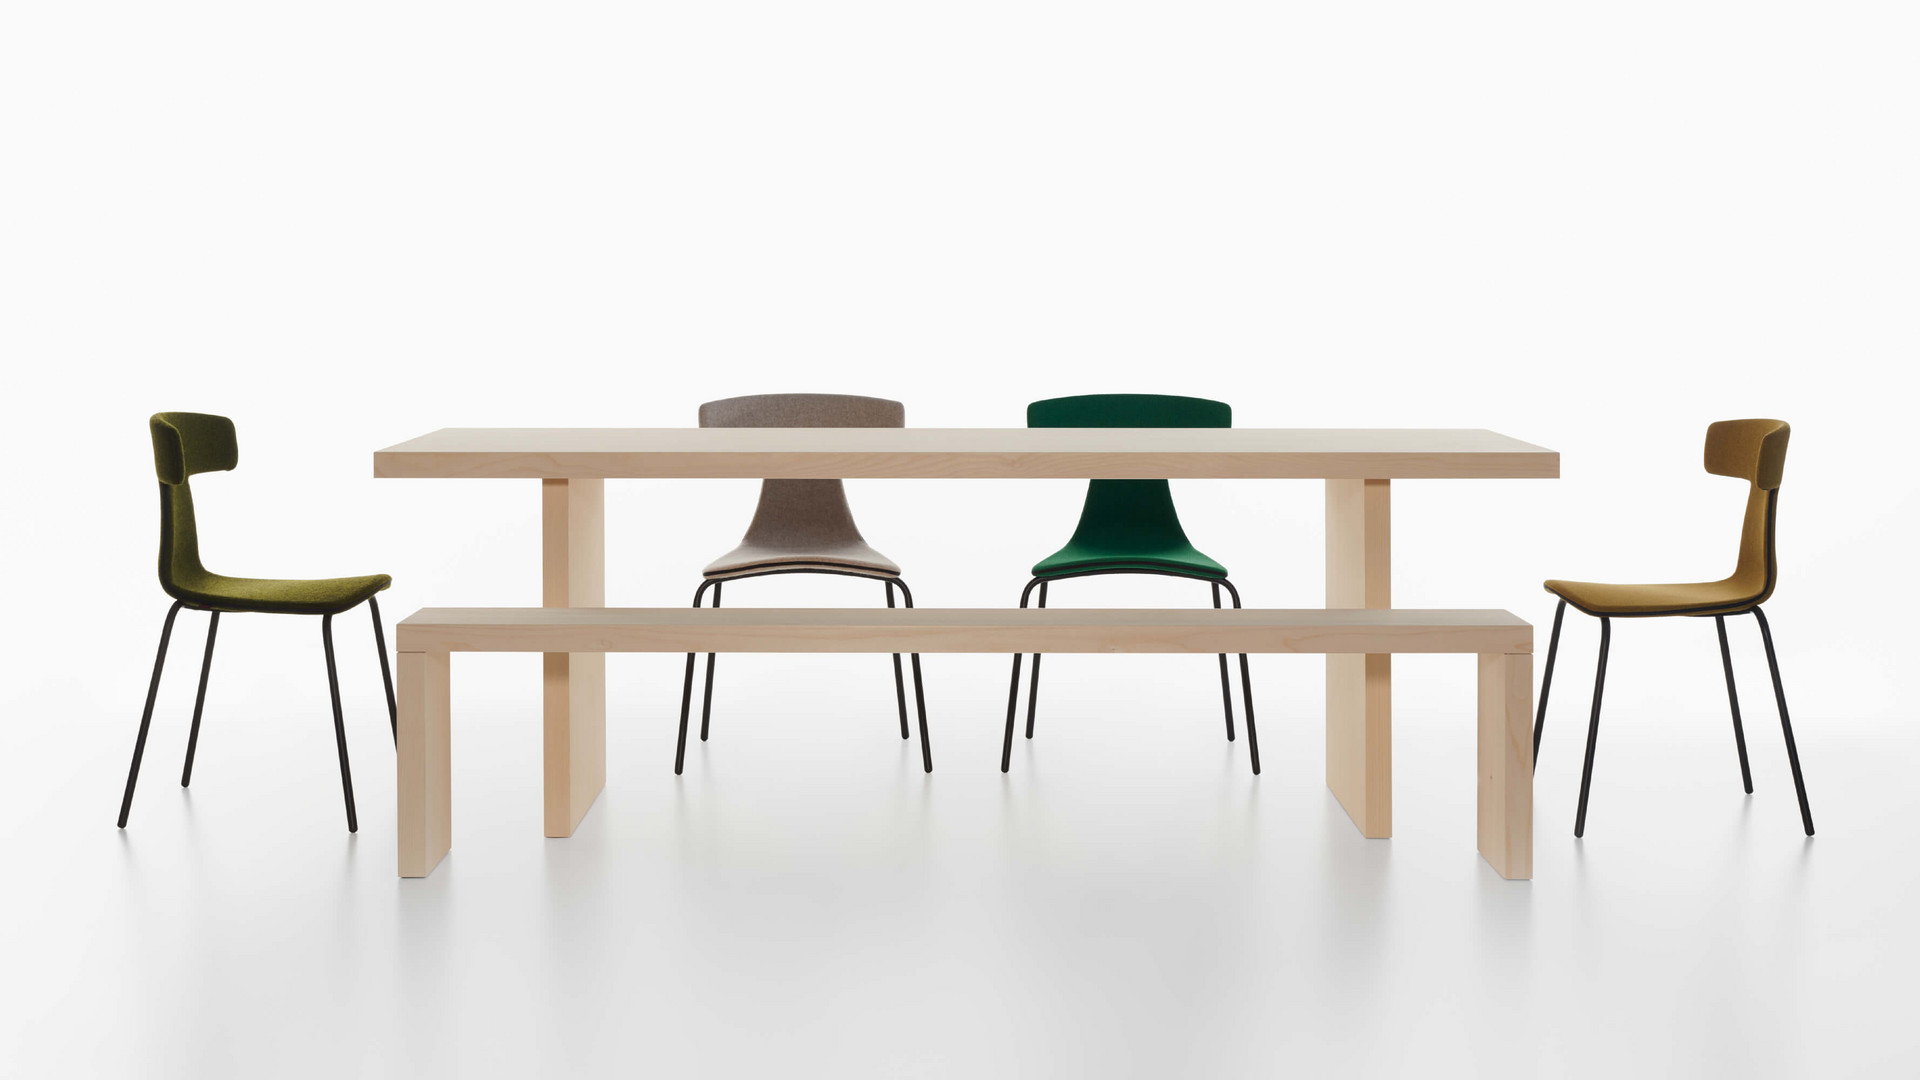 Remo, upholstered, indoor, living, fabric, leather, stackable chair, konstantin grcic, plank, bench, bench table